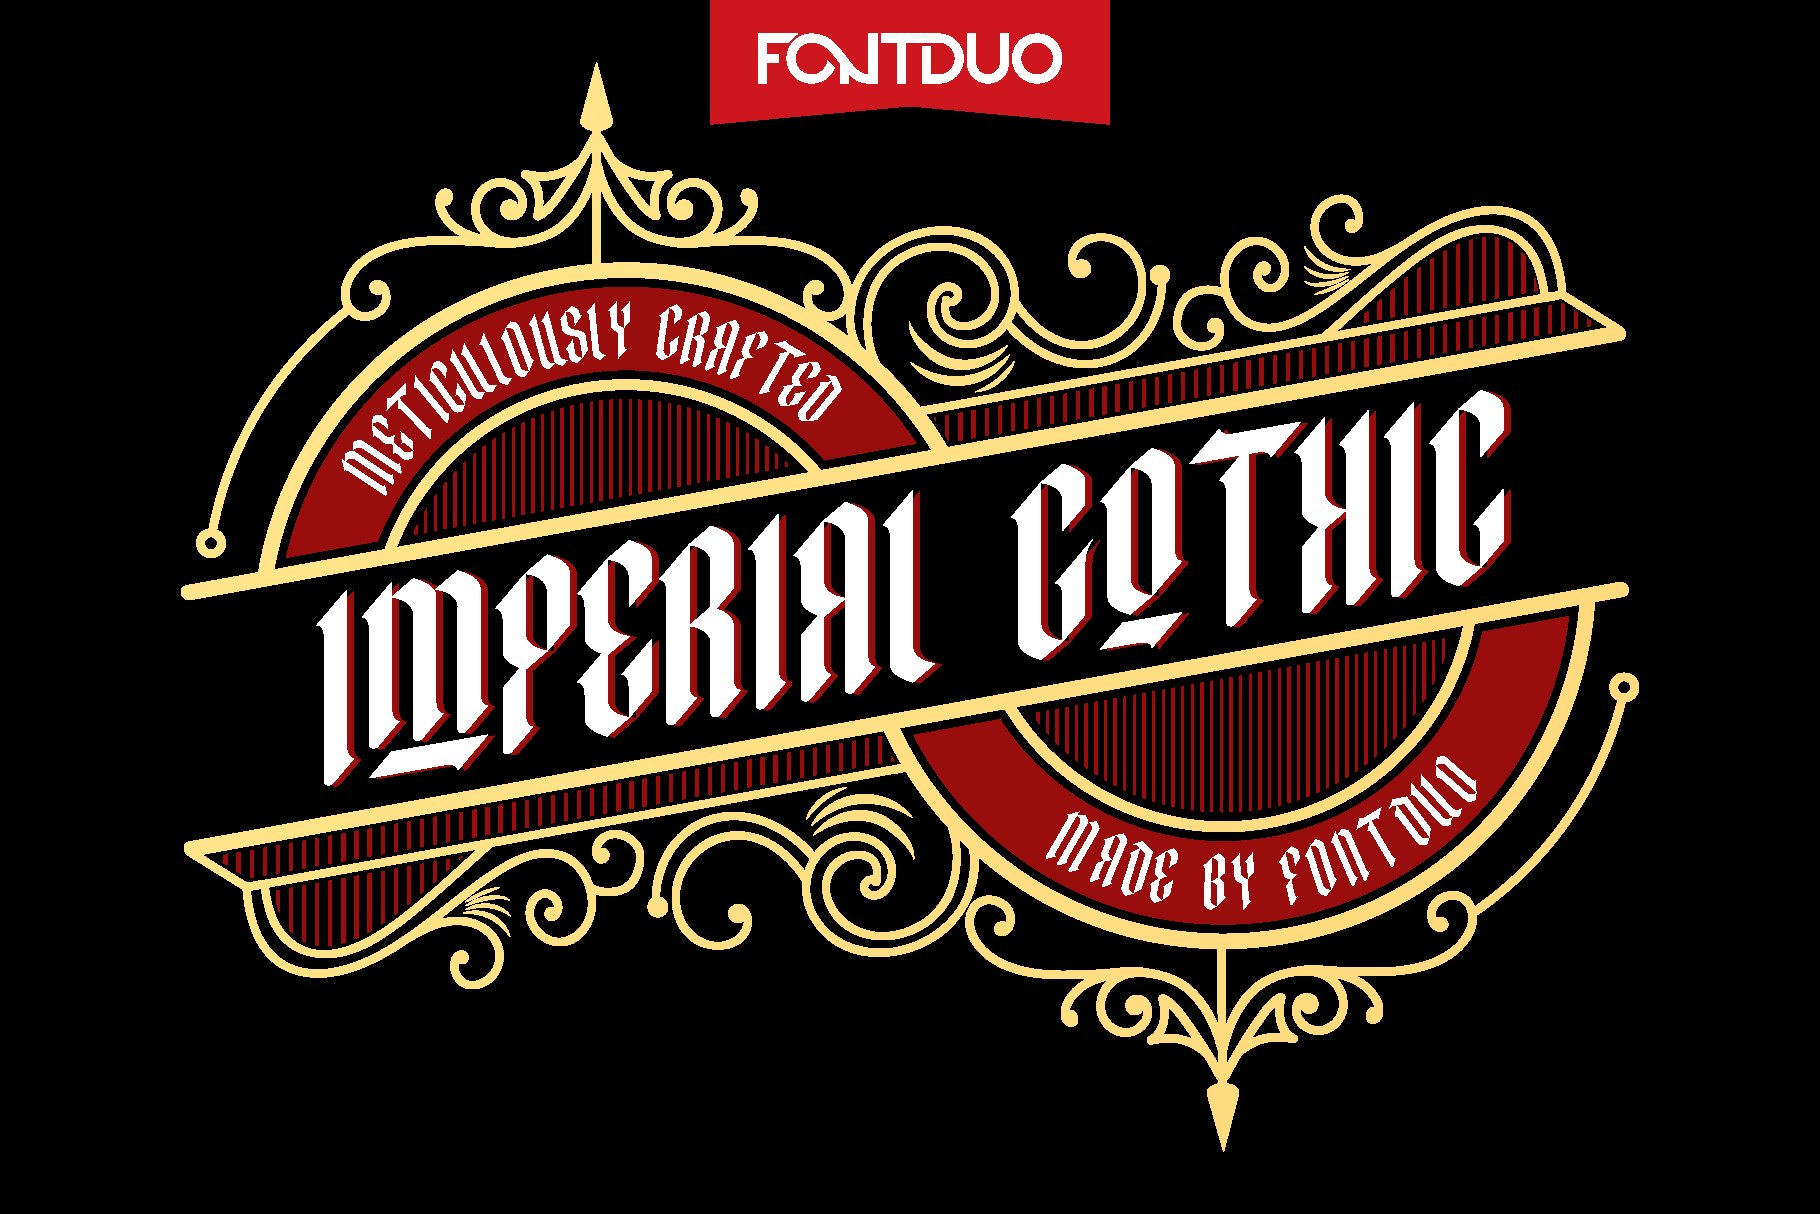 Imperial Gothic Font cover image.